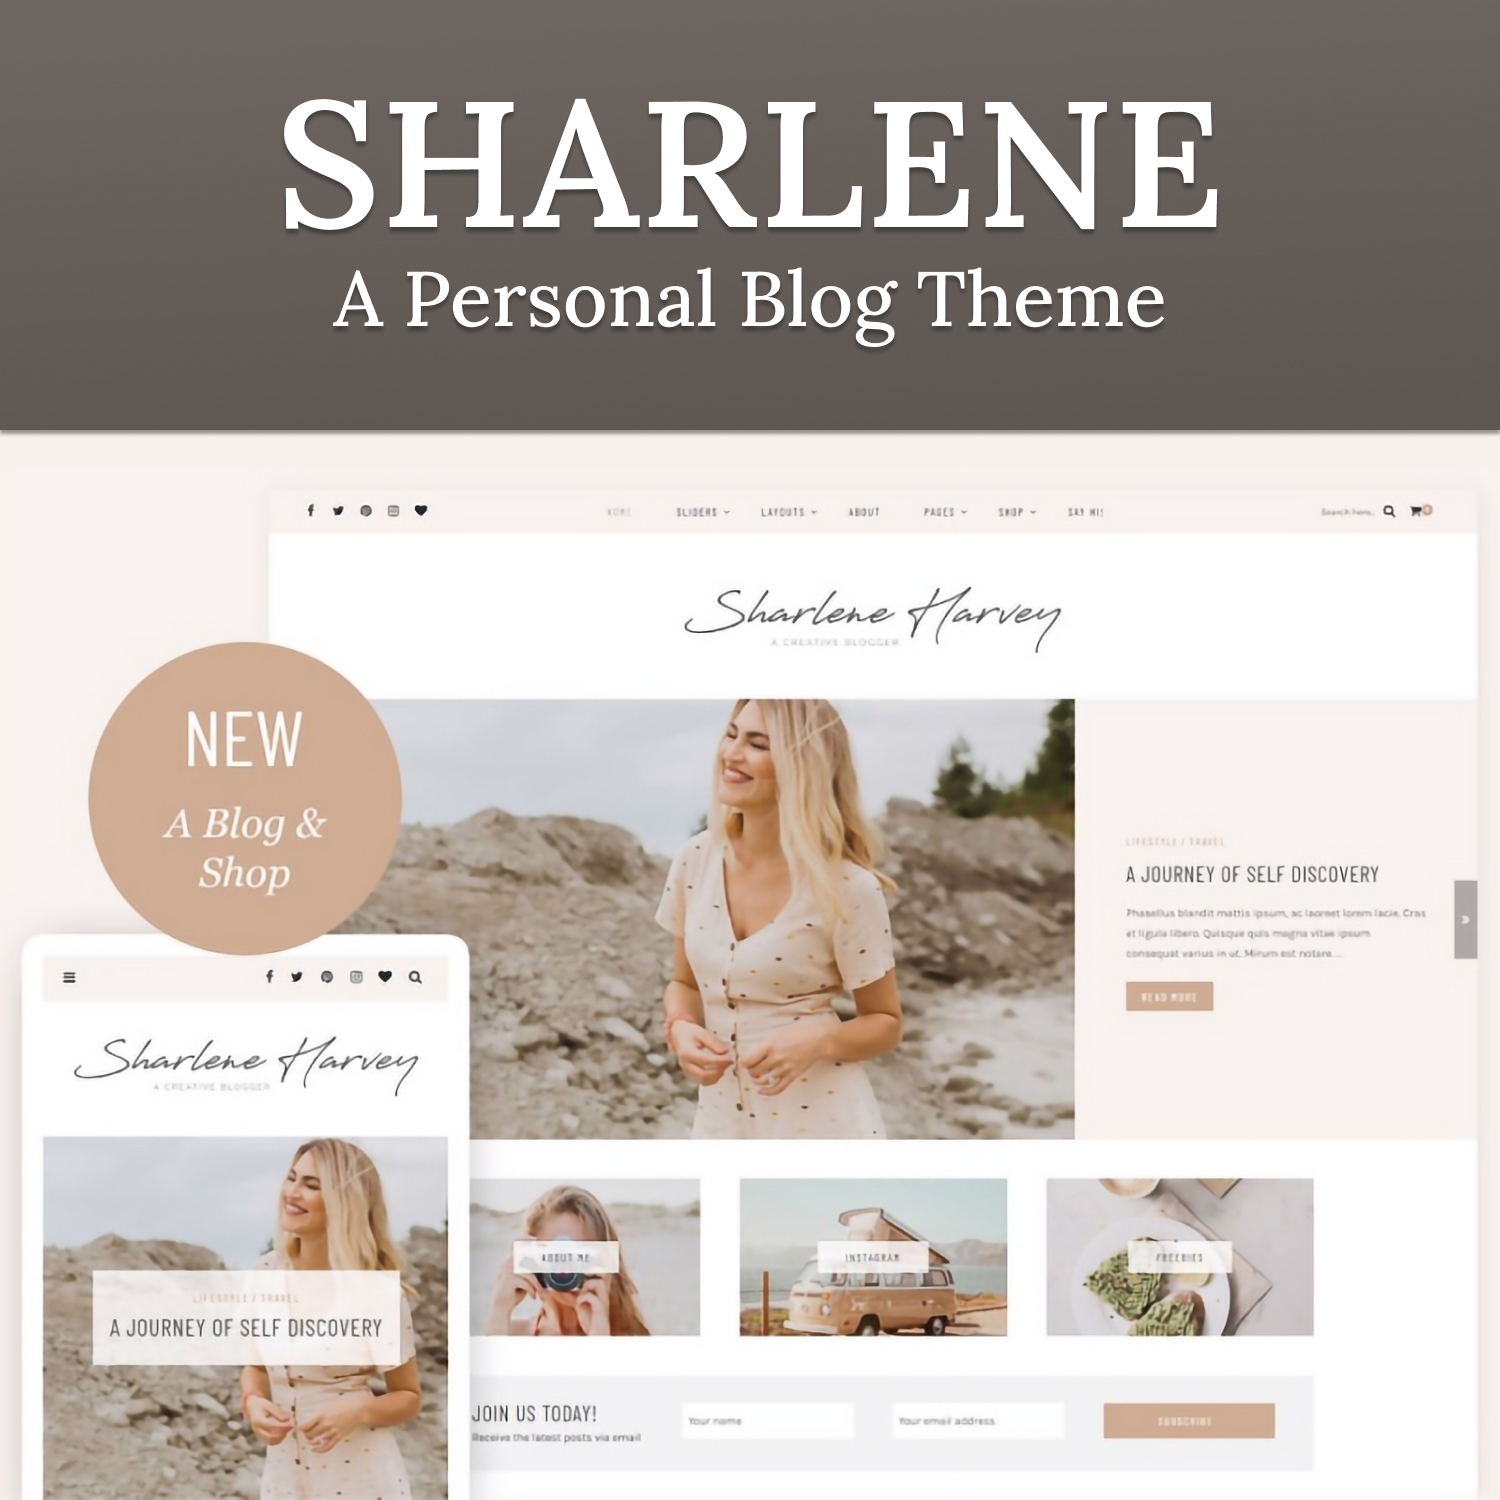 Preview illustrations sharlene a personal blog theme.